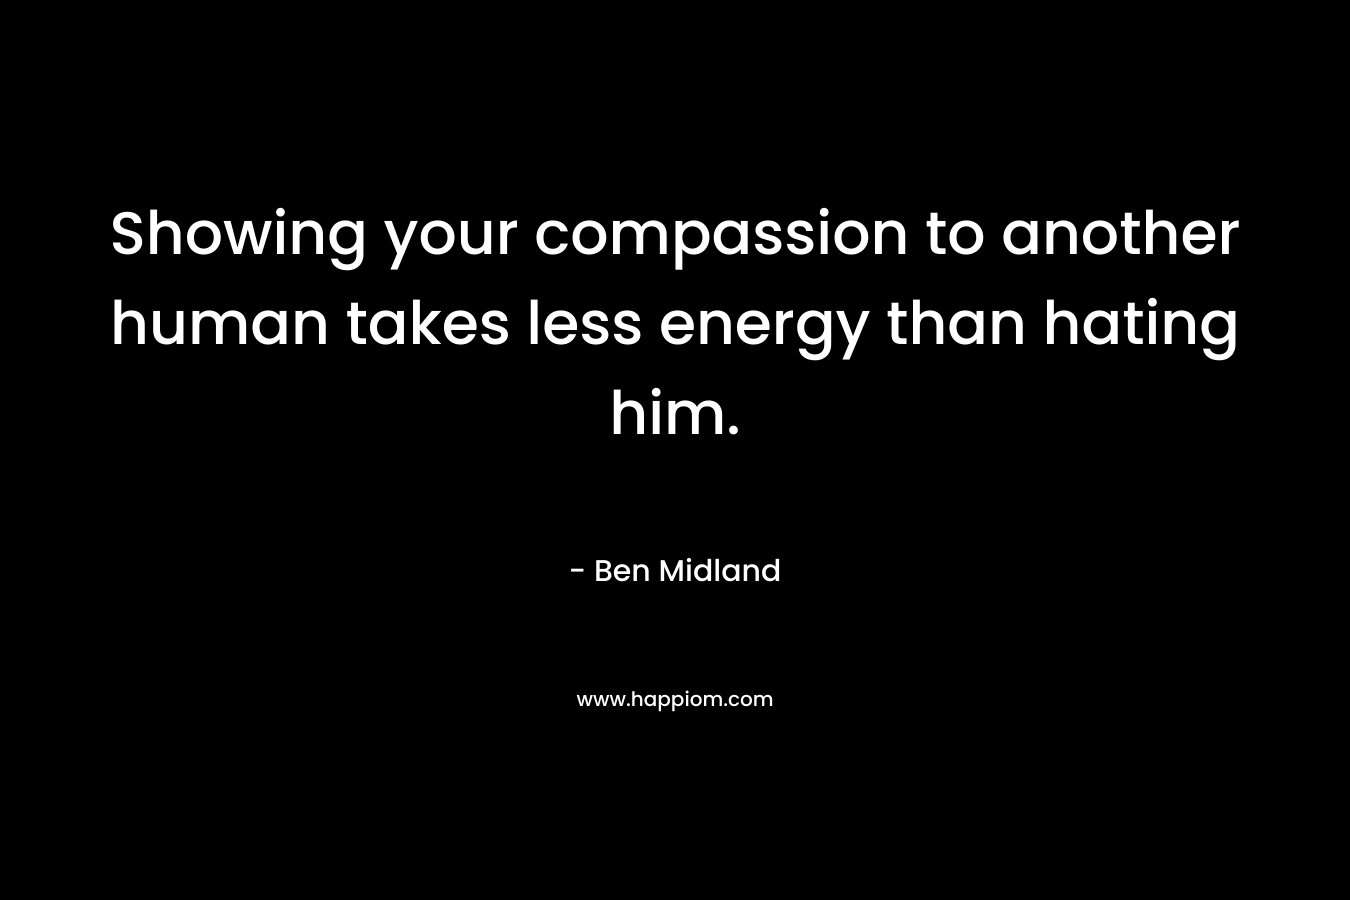 Showing your compassion to another human takes less energy than hating him. – Ben Midland